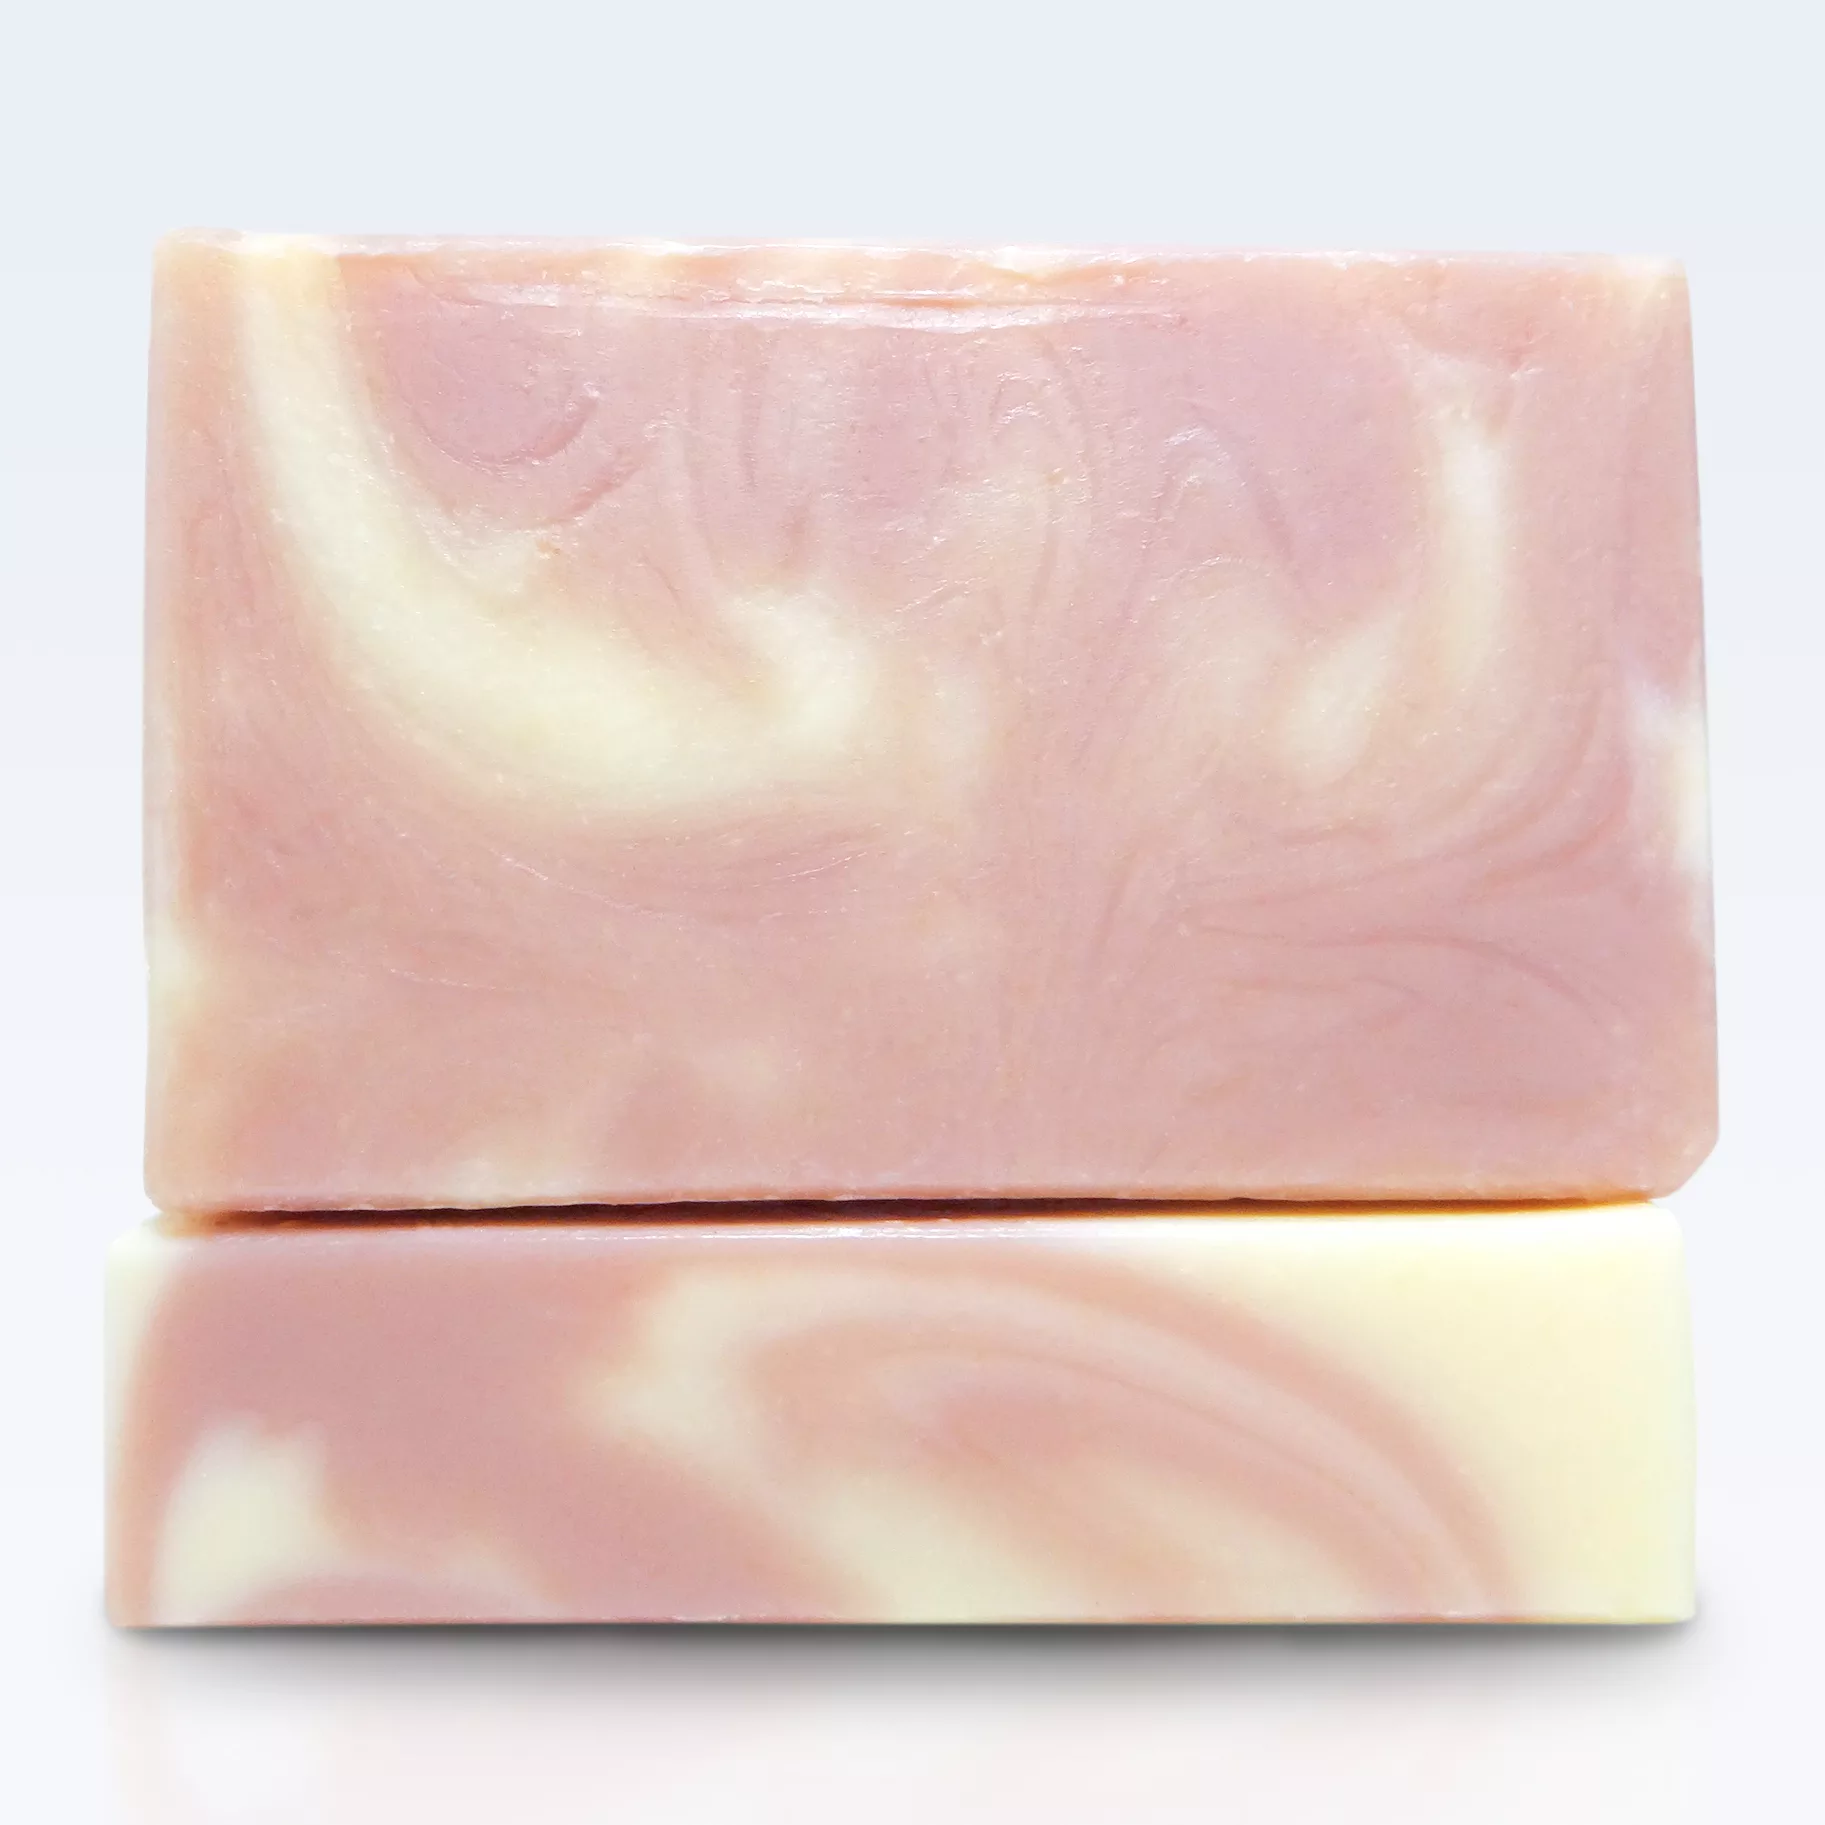 Lemon Lavender handmade soap by Tubby Tabby Soaps (all natural with essential oils and alkanet root)